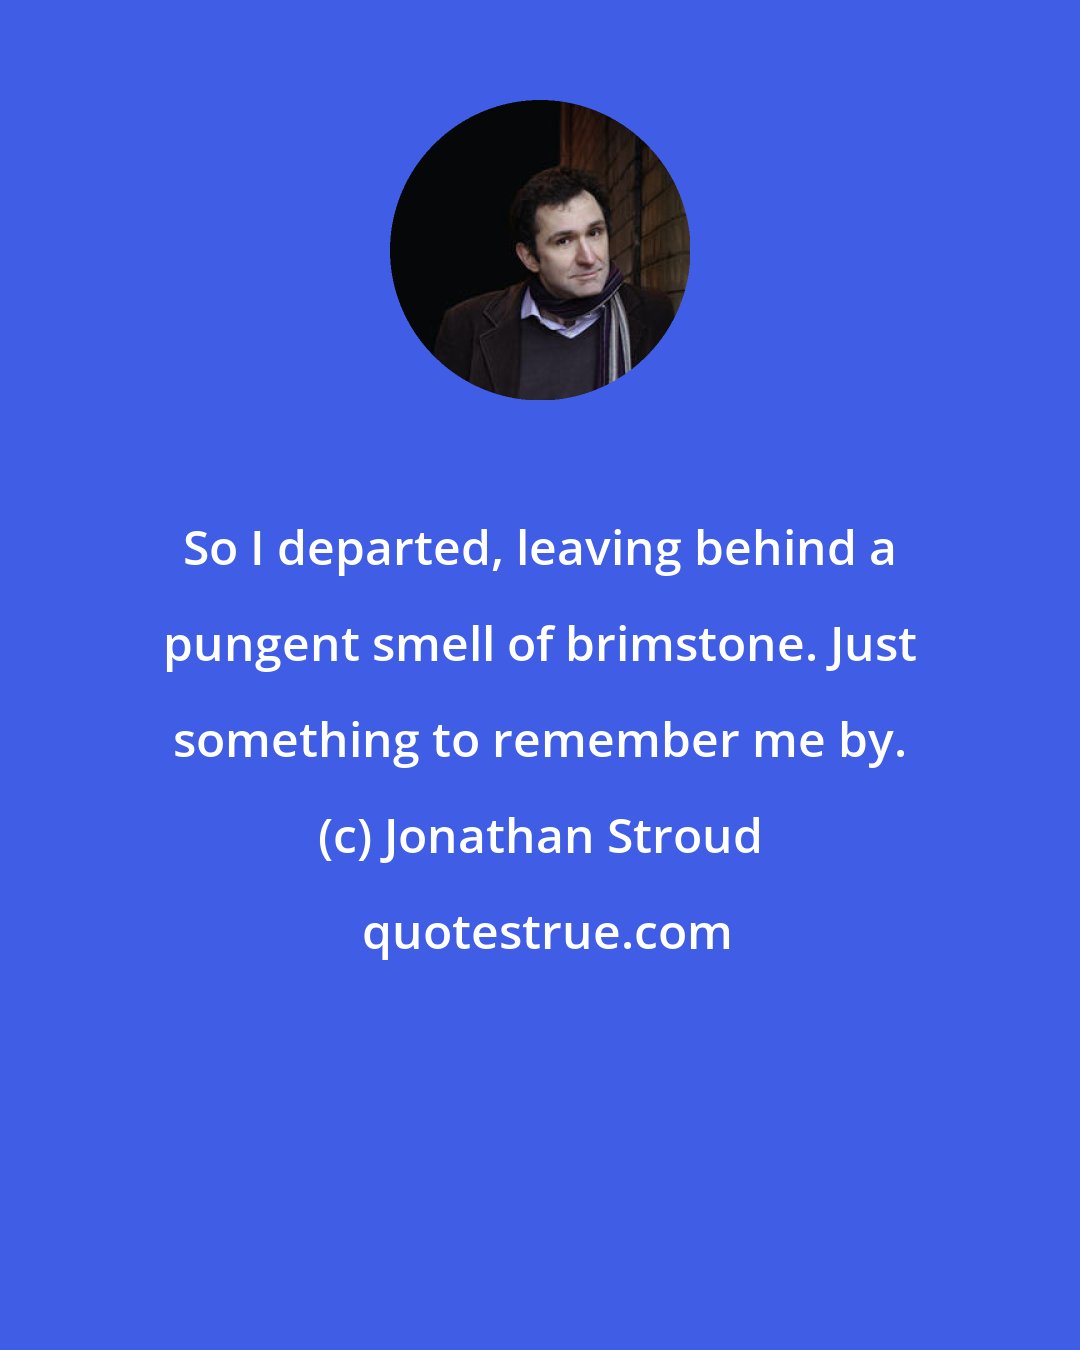 Jonathan Stroud: So I departed, leaving behind a pungent smell of brimstone. Just something to remember me by.